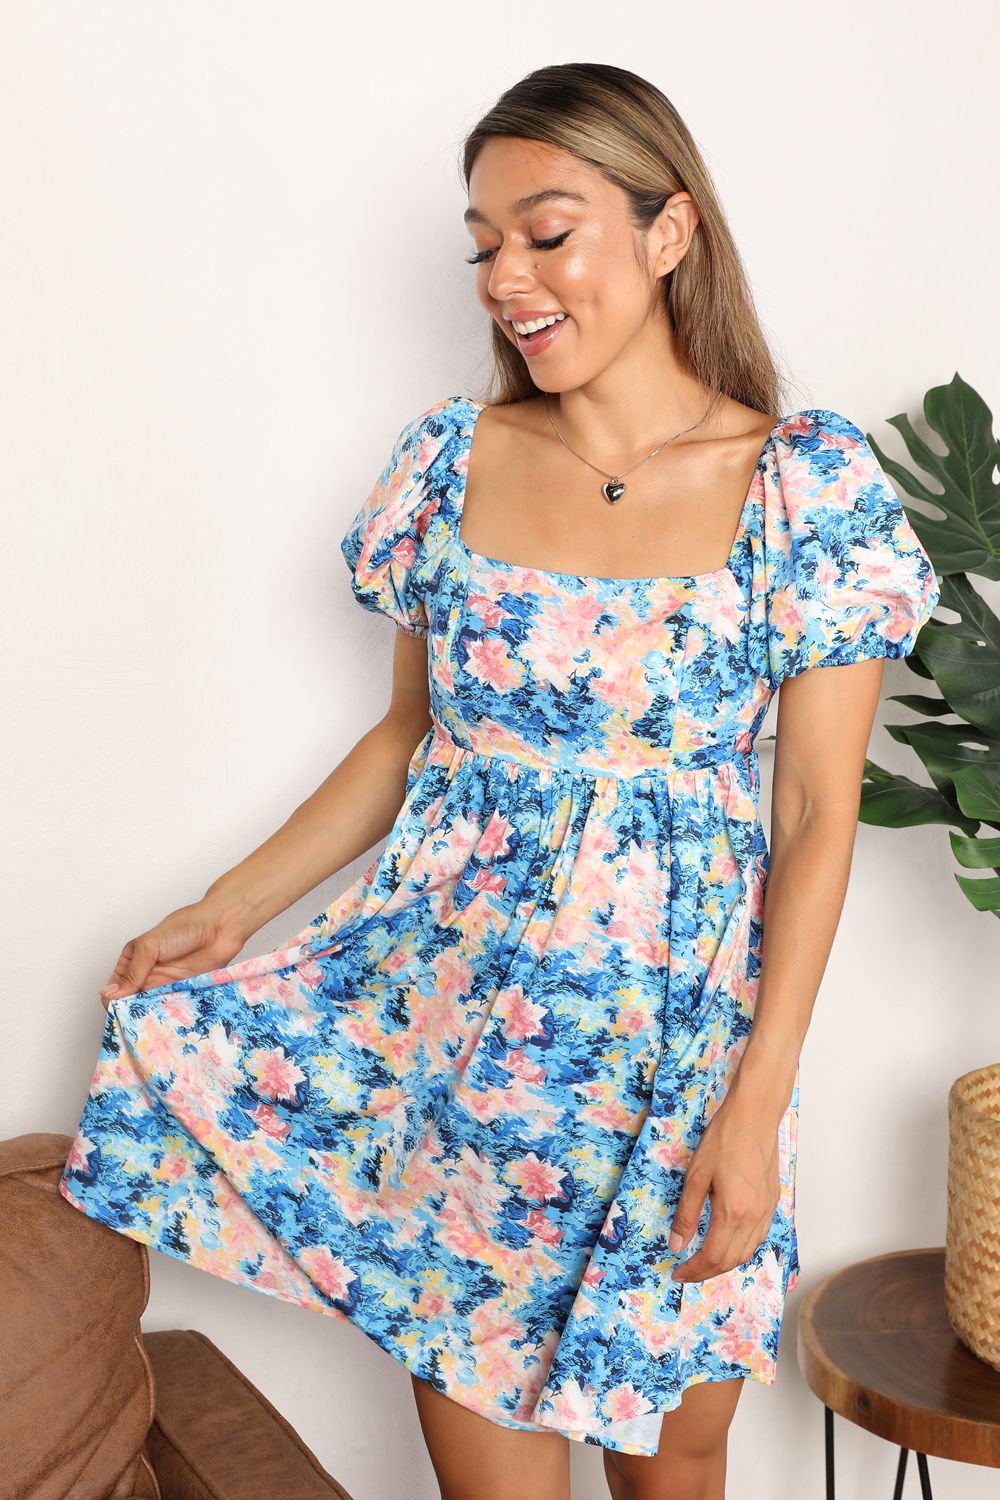 Double Take Floral Square Neck Puff Sleeve Dress - Alonna's Legging Land